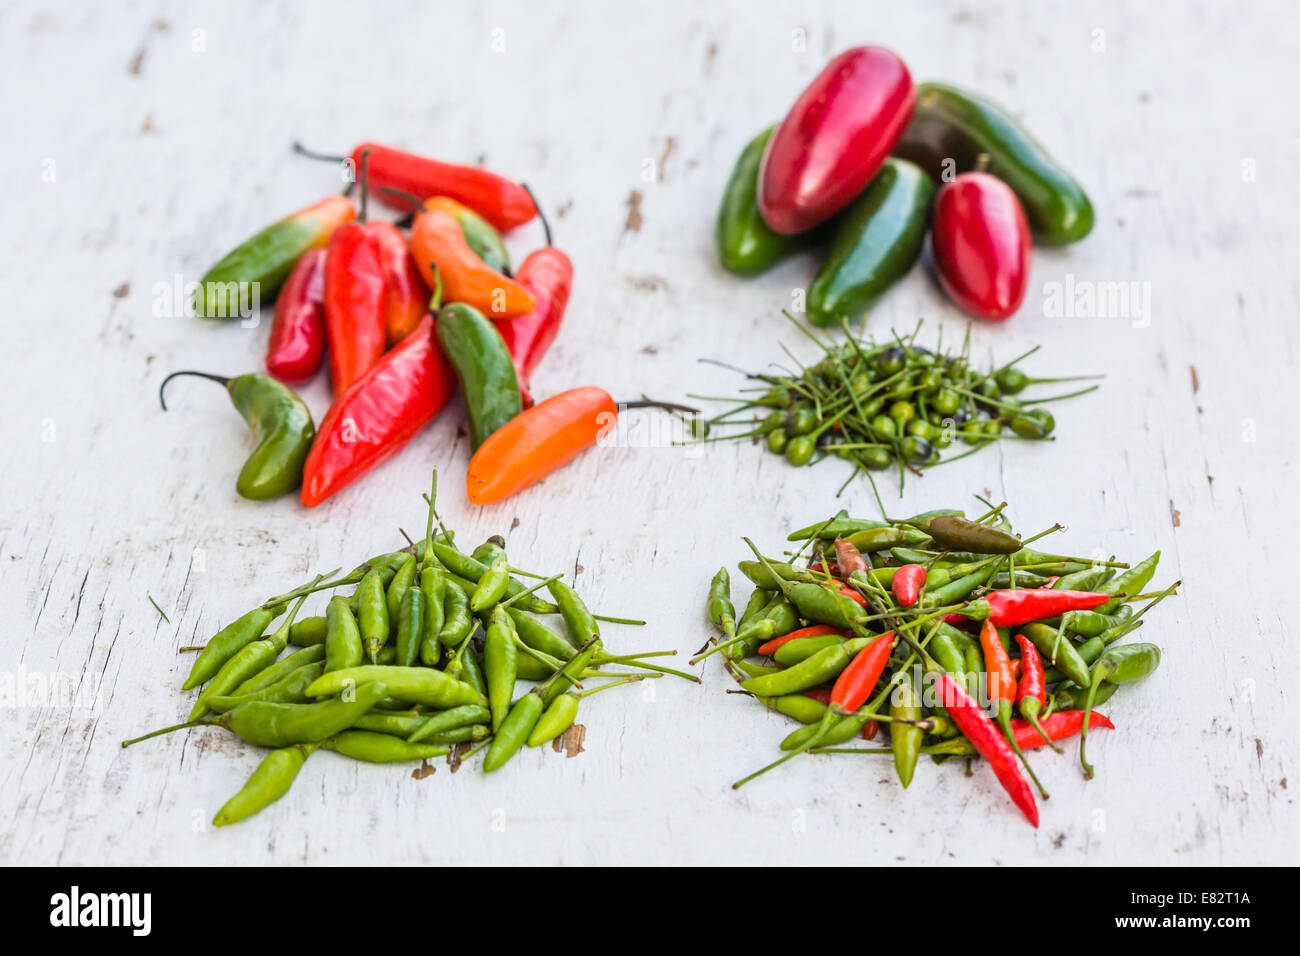 Red and green chilli peppers. Stock Photo